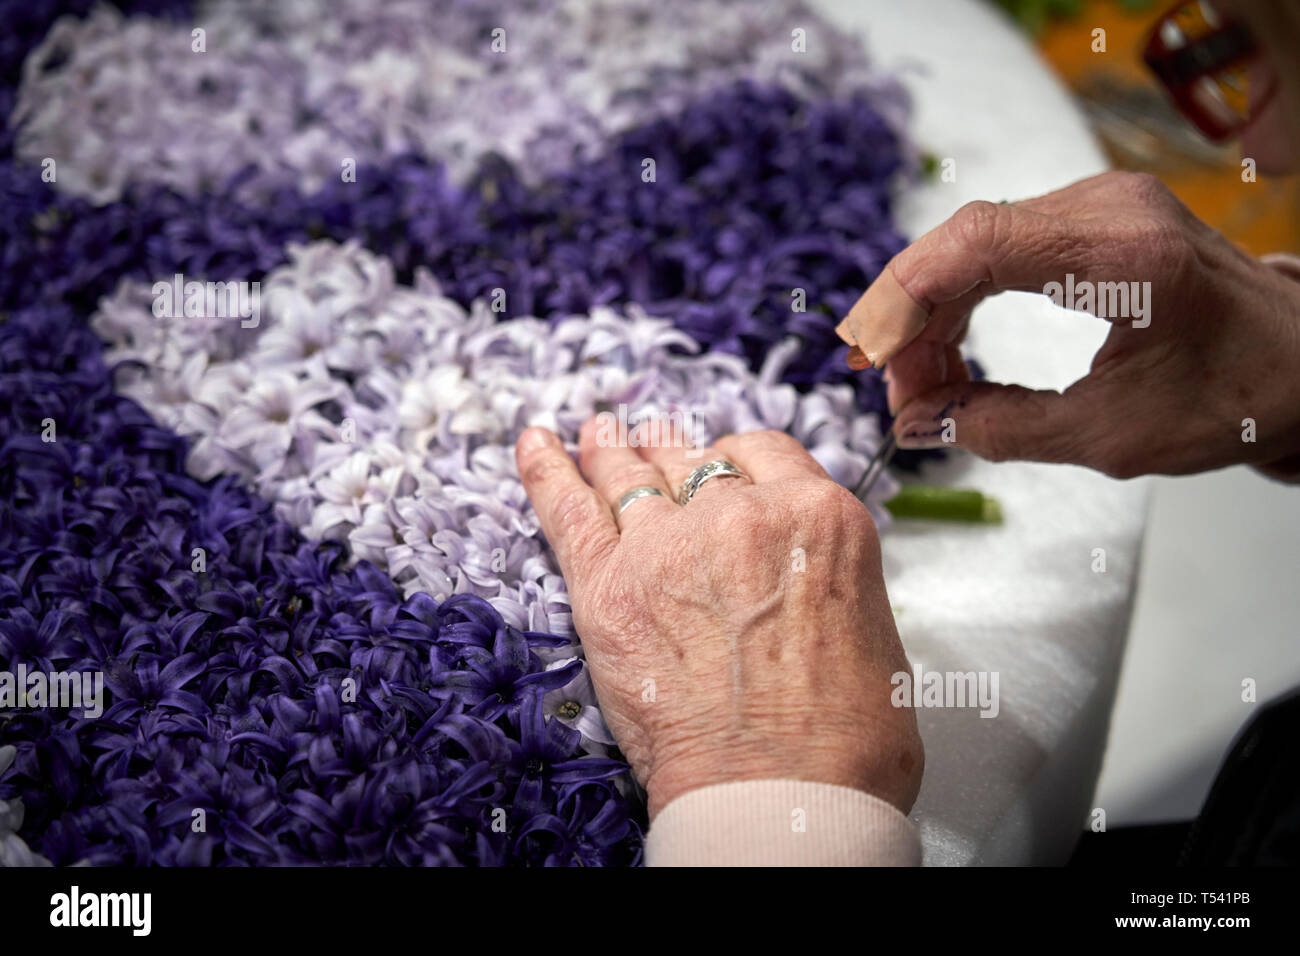 Participants cover with flowers the floats that will participate in the parade of the flower producing region in Holland. Stock Photo